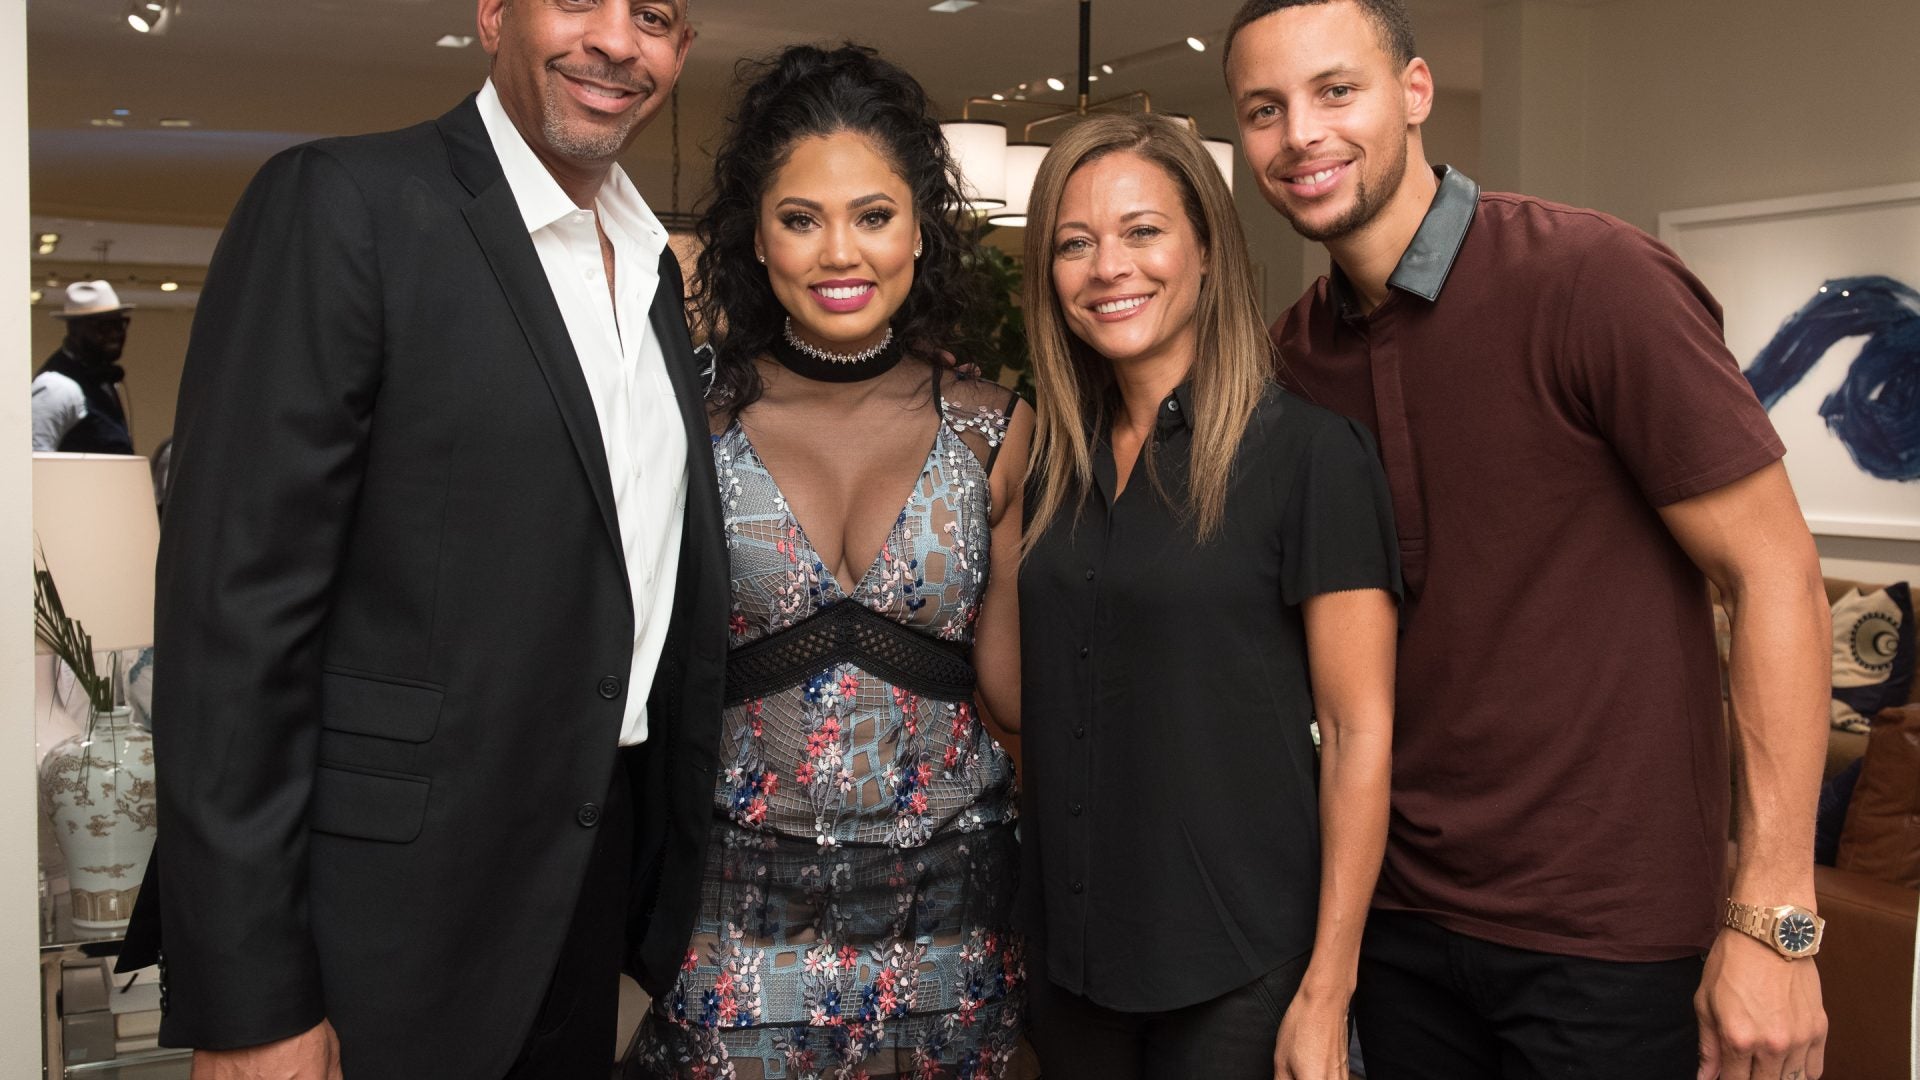 'It’s Challenging For Sure': Steph Curry Opens Up About His Parents' Divorce And Being There For Them — Separately